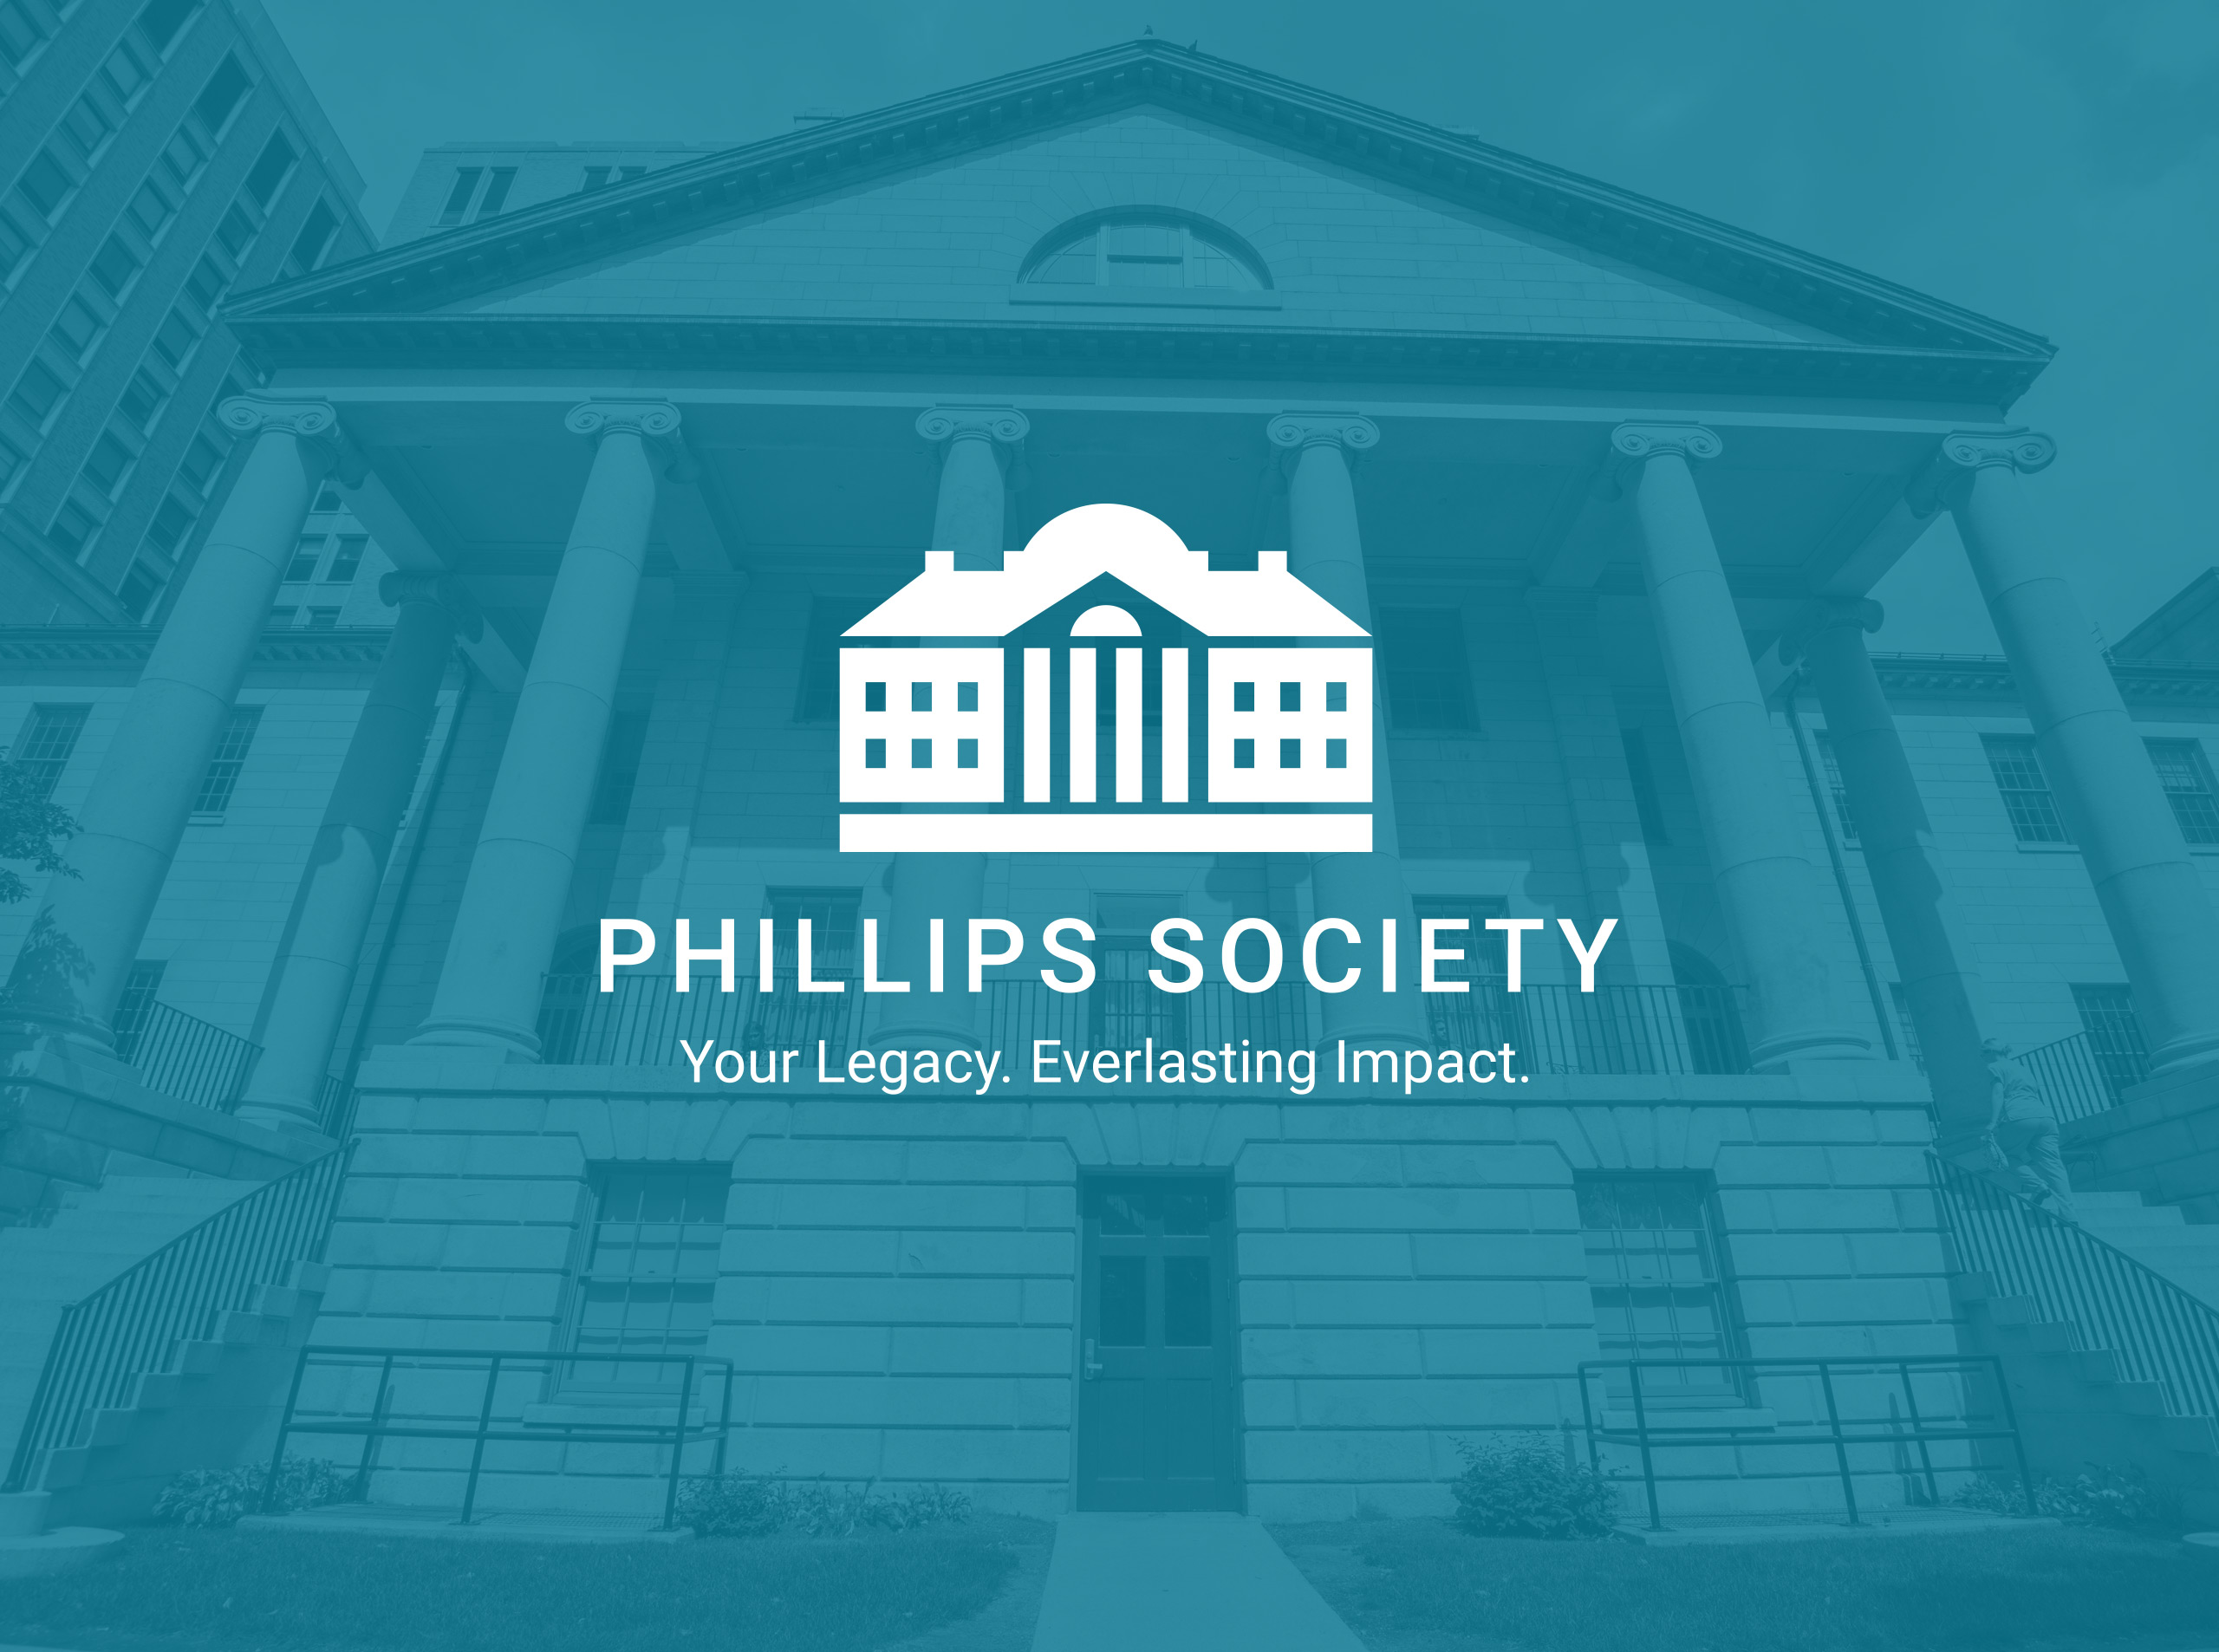 The Phillips Society